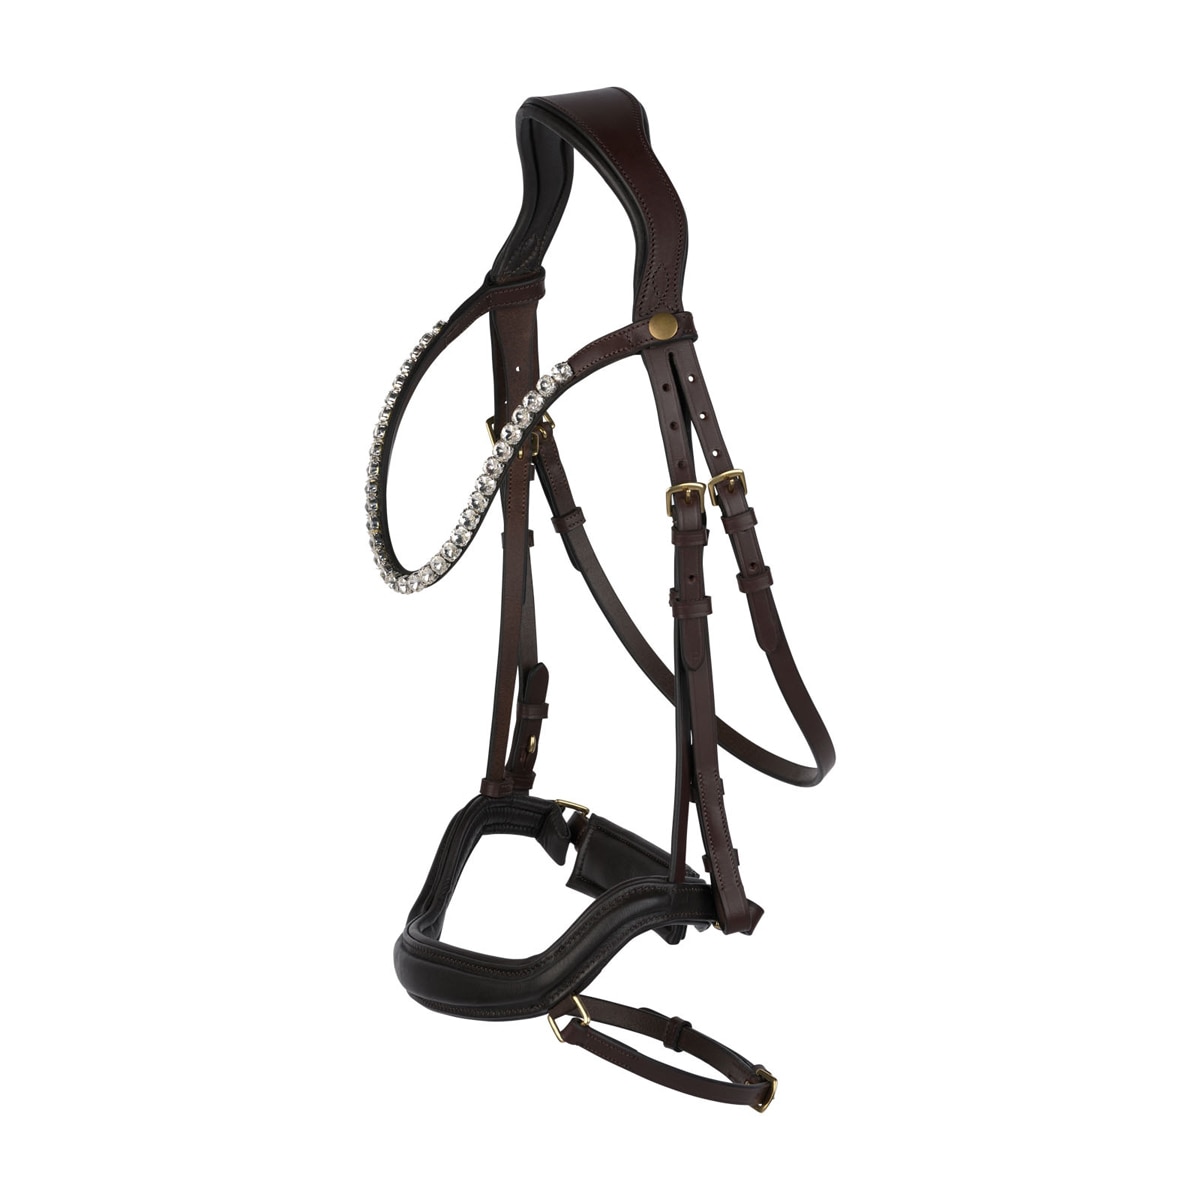 Pony Cob Full bridle leather anatomical pressure relief comfort padded & reins